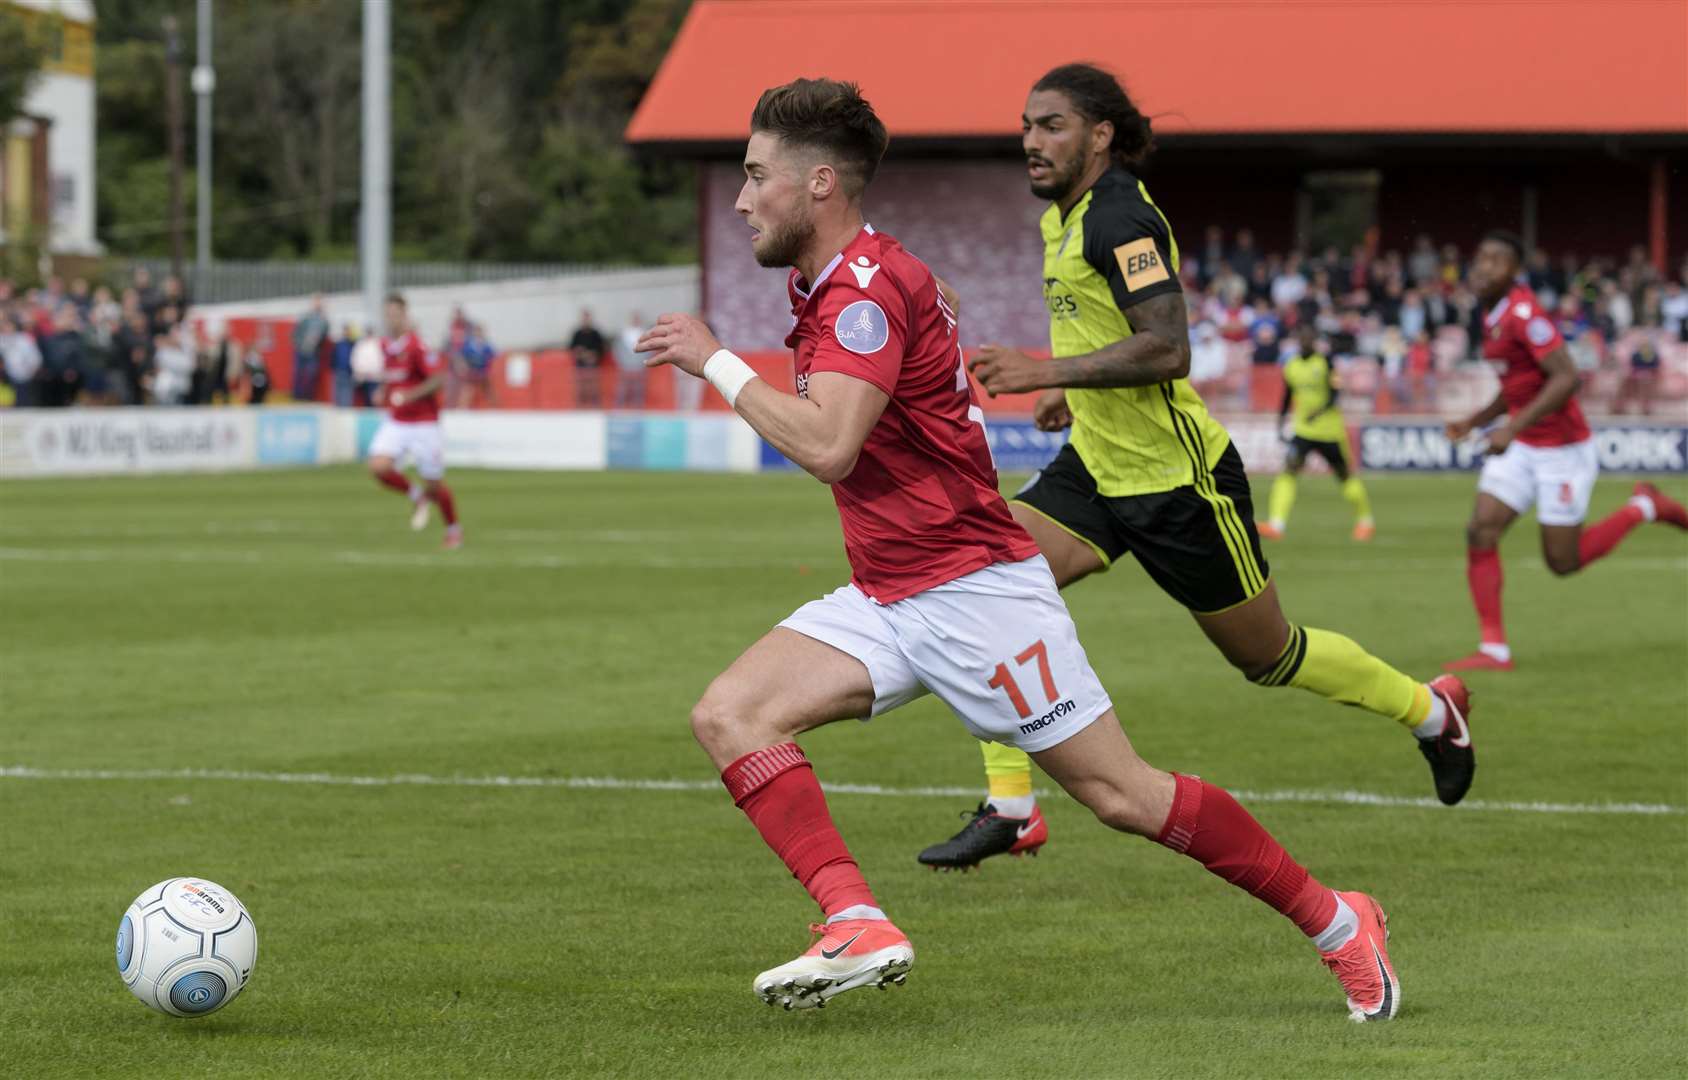 Sean Shields runs at the Aldershot defence Picture: Andy Payton